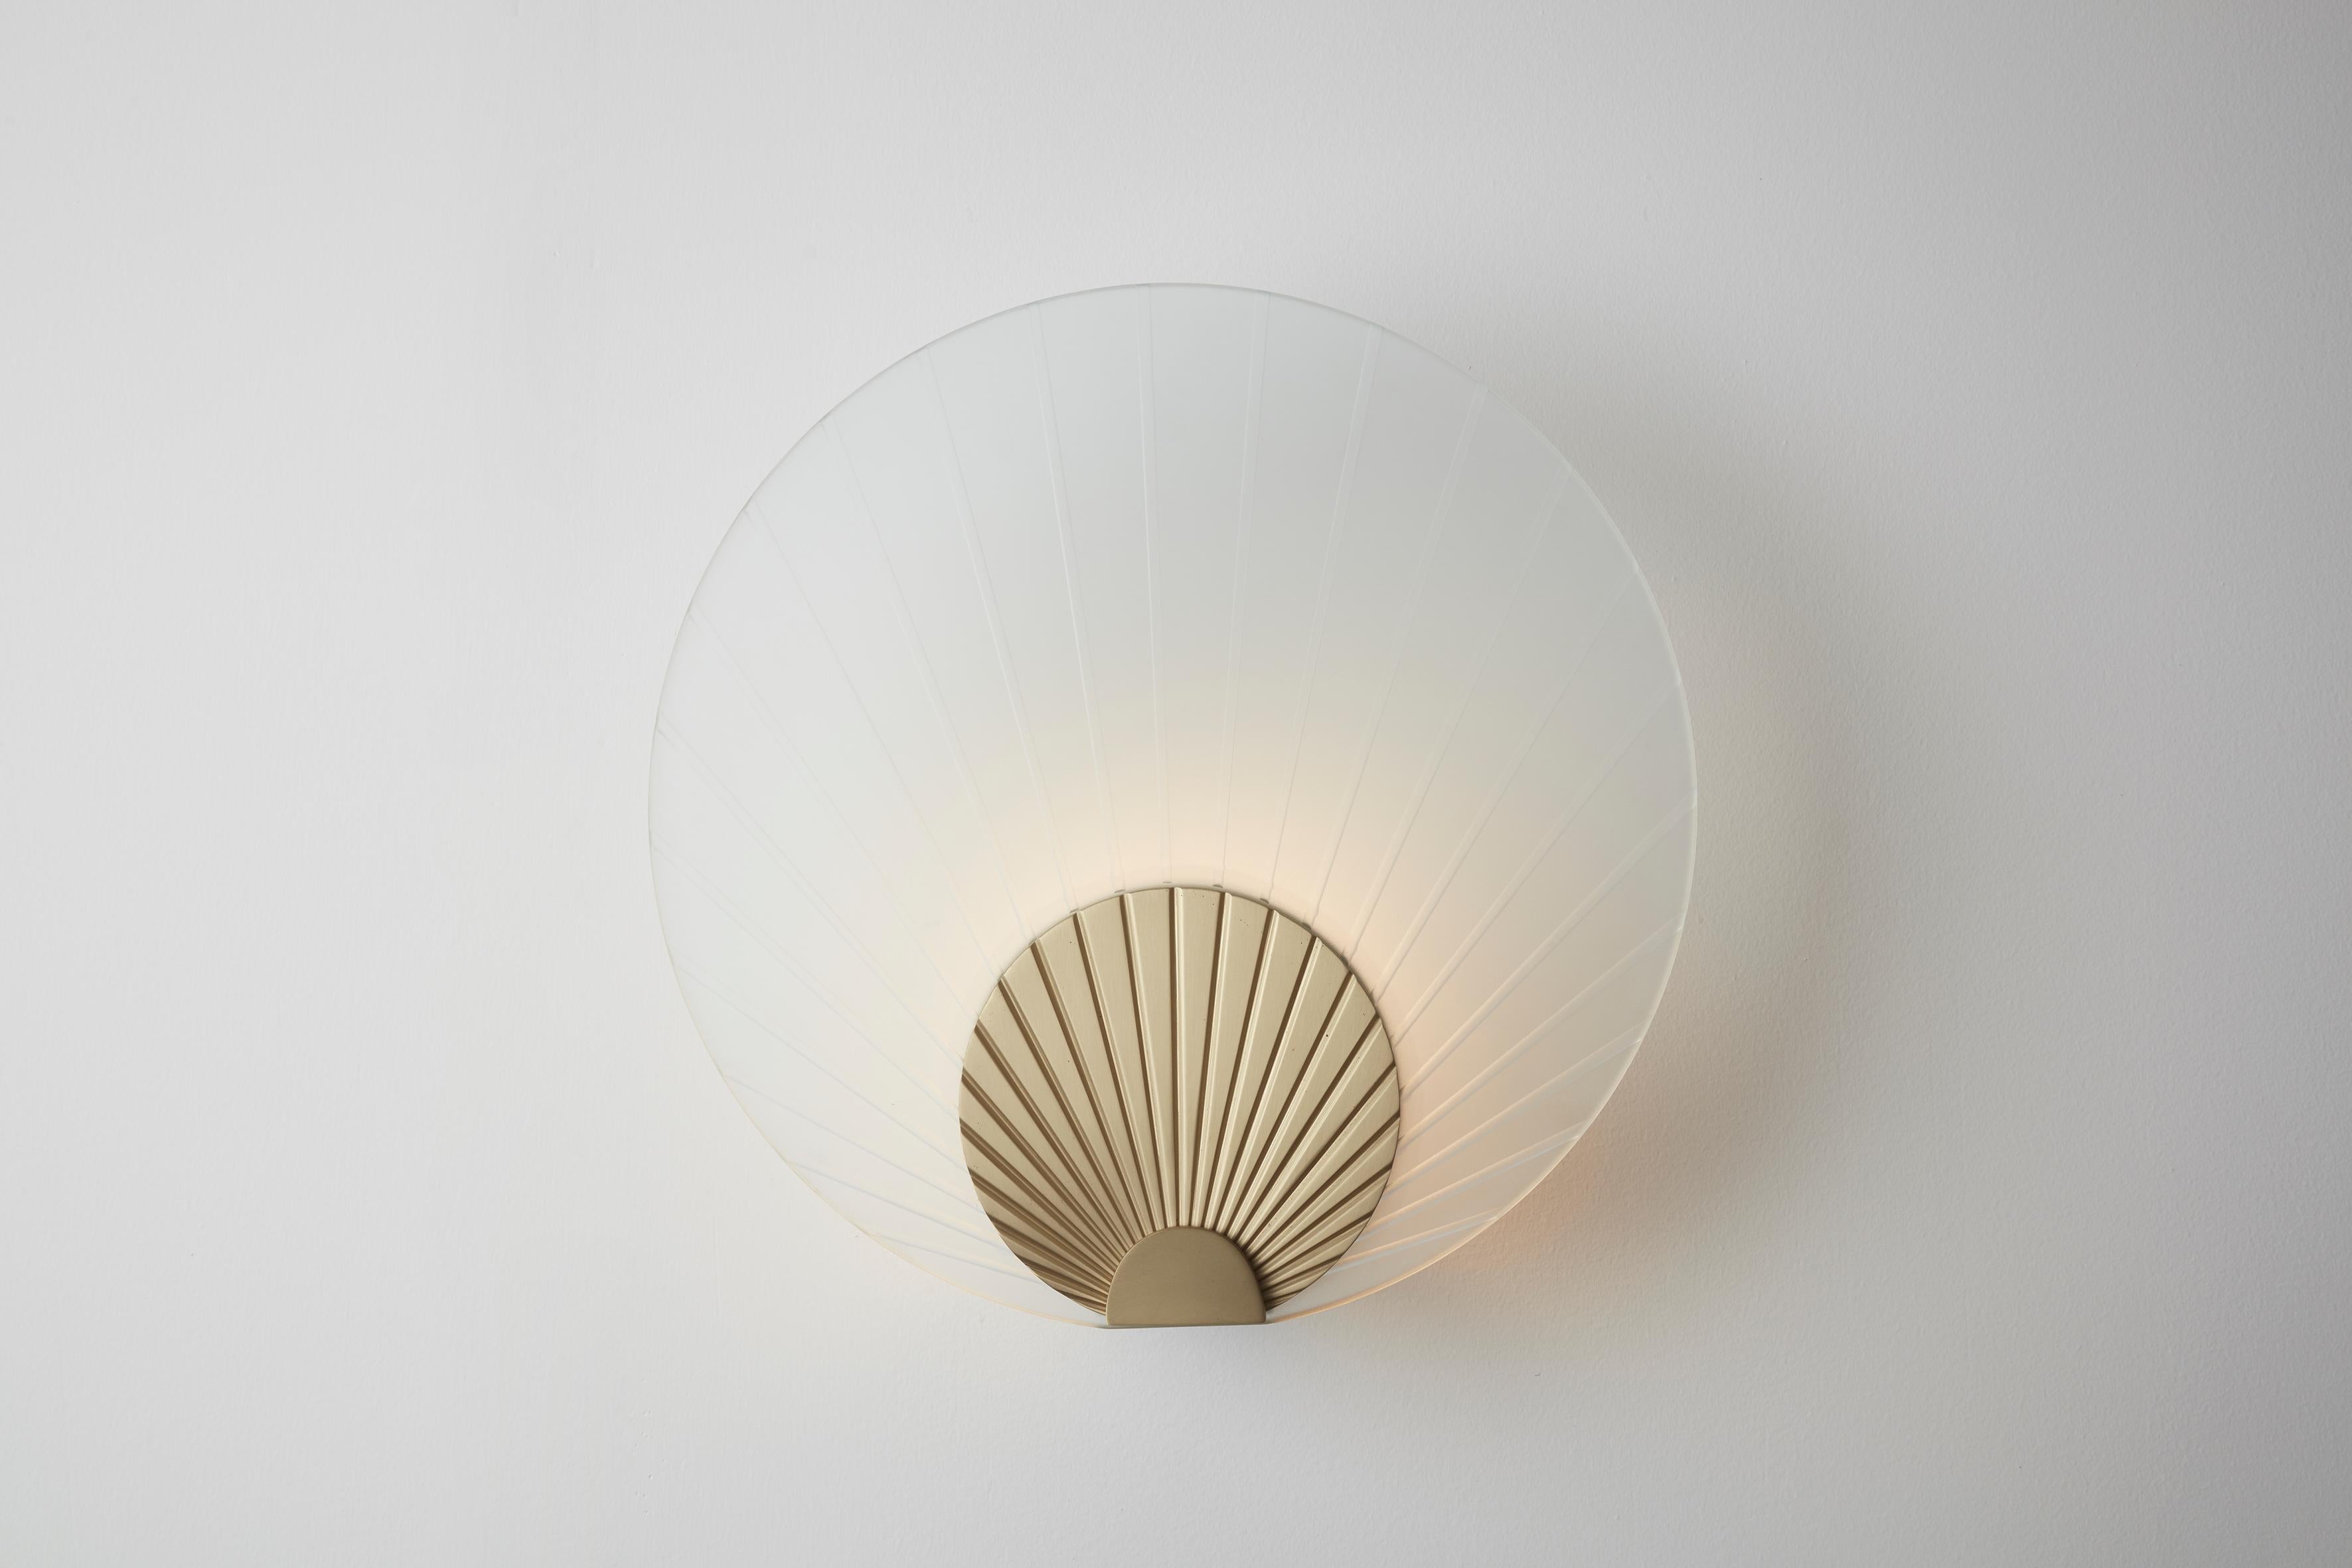 Maiko wall mounted brass and clear, Carla Baz
Dimensions: ø 35 x D 14 cm
Weight: 3.5 kg
Material: Brass

Maiko lighting pieces are inspired by the beautiful Japanese folding fans held by geishas and maikos during their notorious dances. These